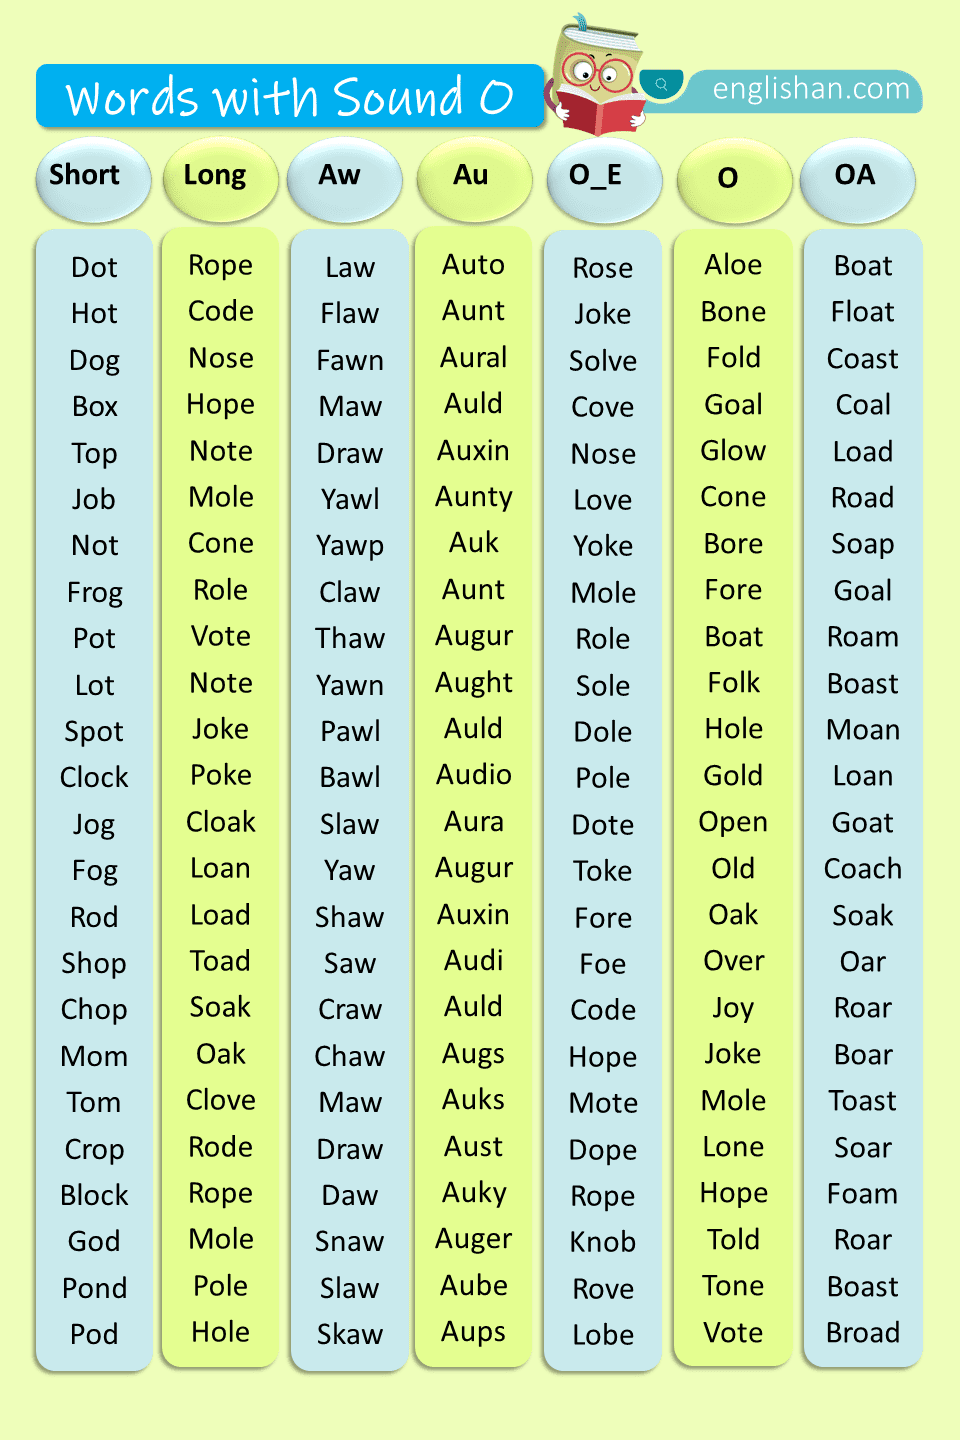 Words with Sound O with Examples